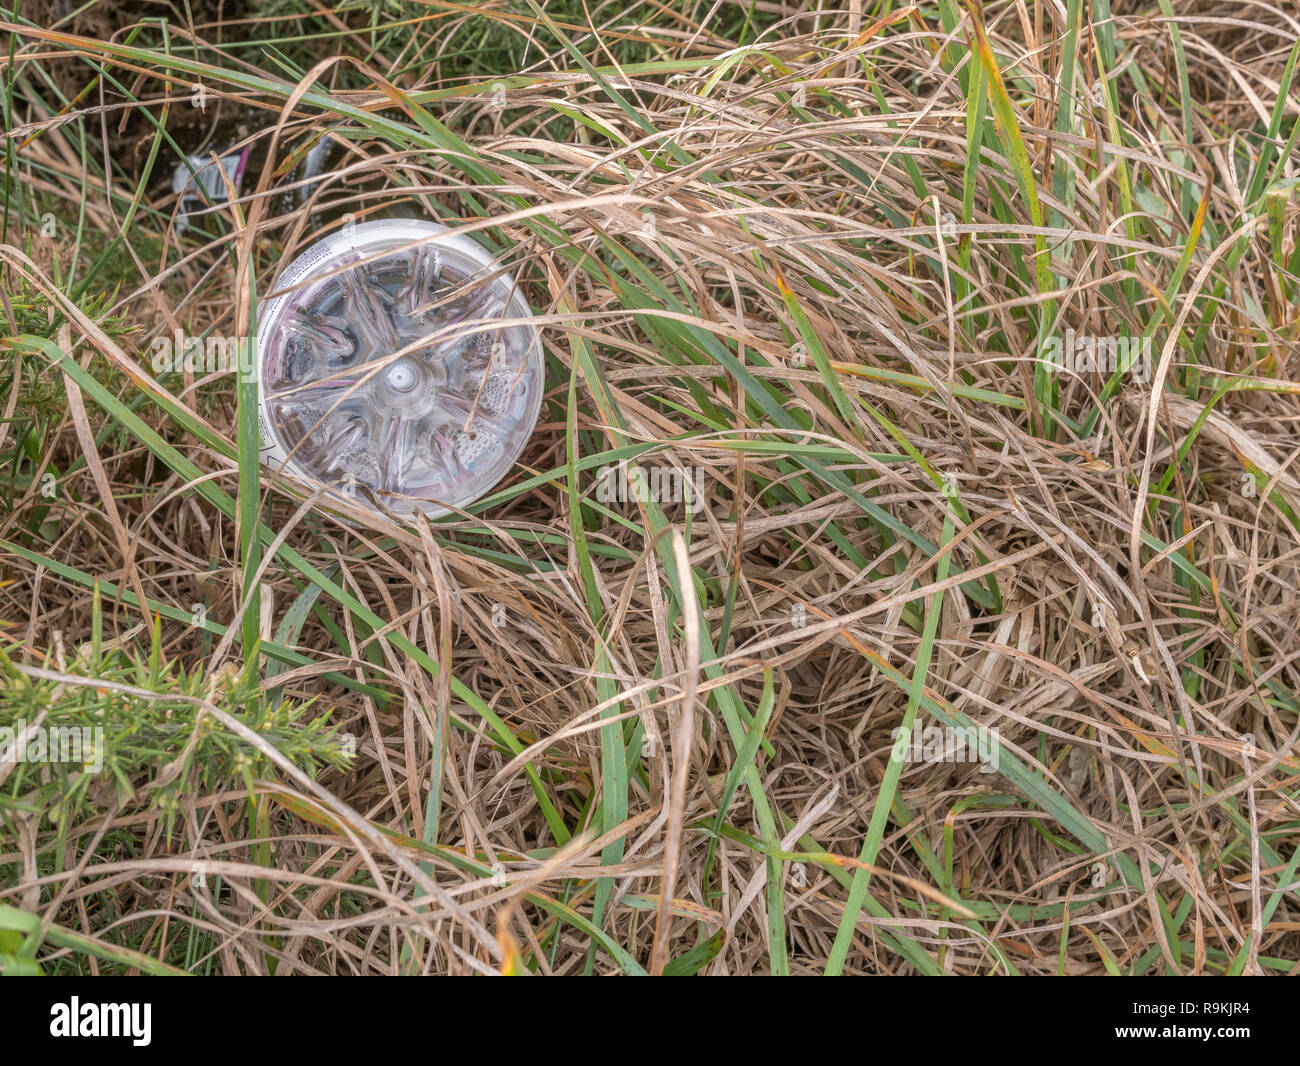 PTFE plastic soft drink bottle discarded in rural hedgerow ditch. Metaphor plastic pollution, environmental pollution, war on plastic waste. Stock Photo